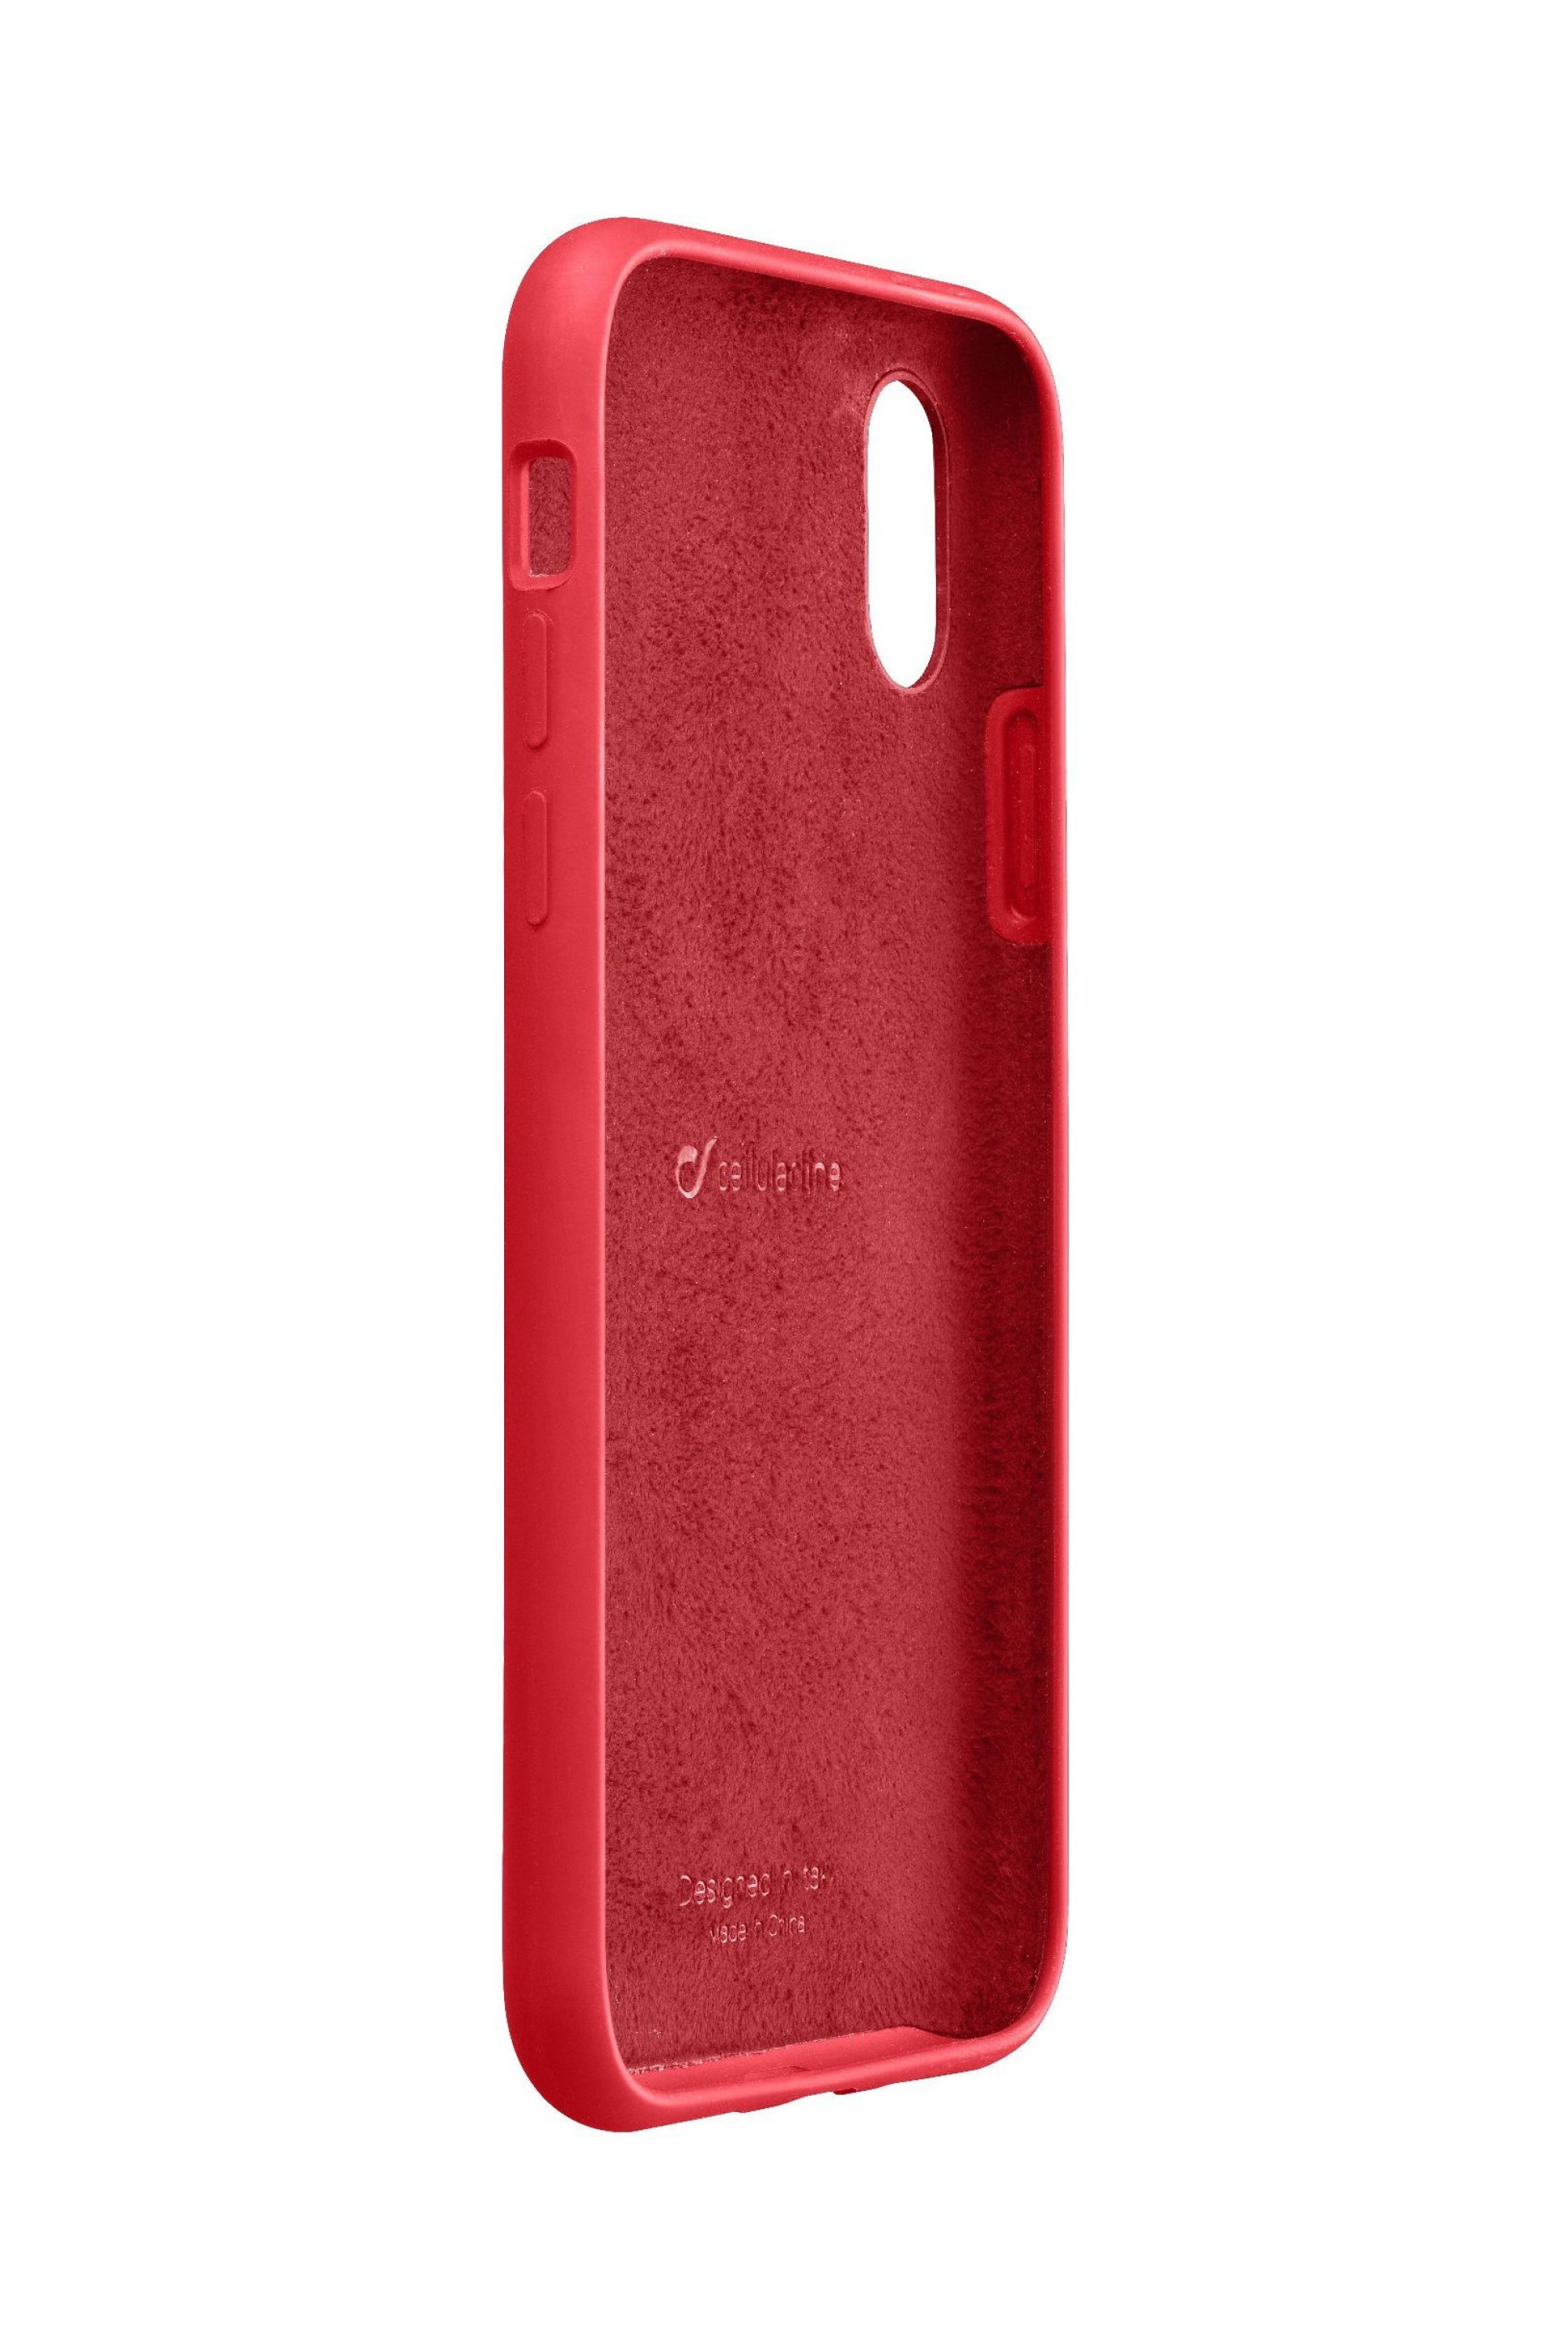 CellularLine Sensation Soft Touch Case Red for iPhone XR